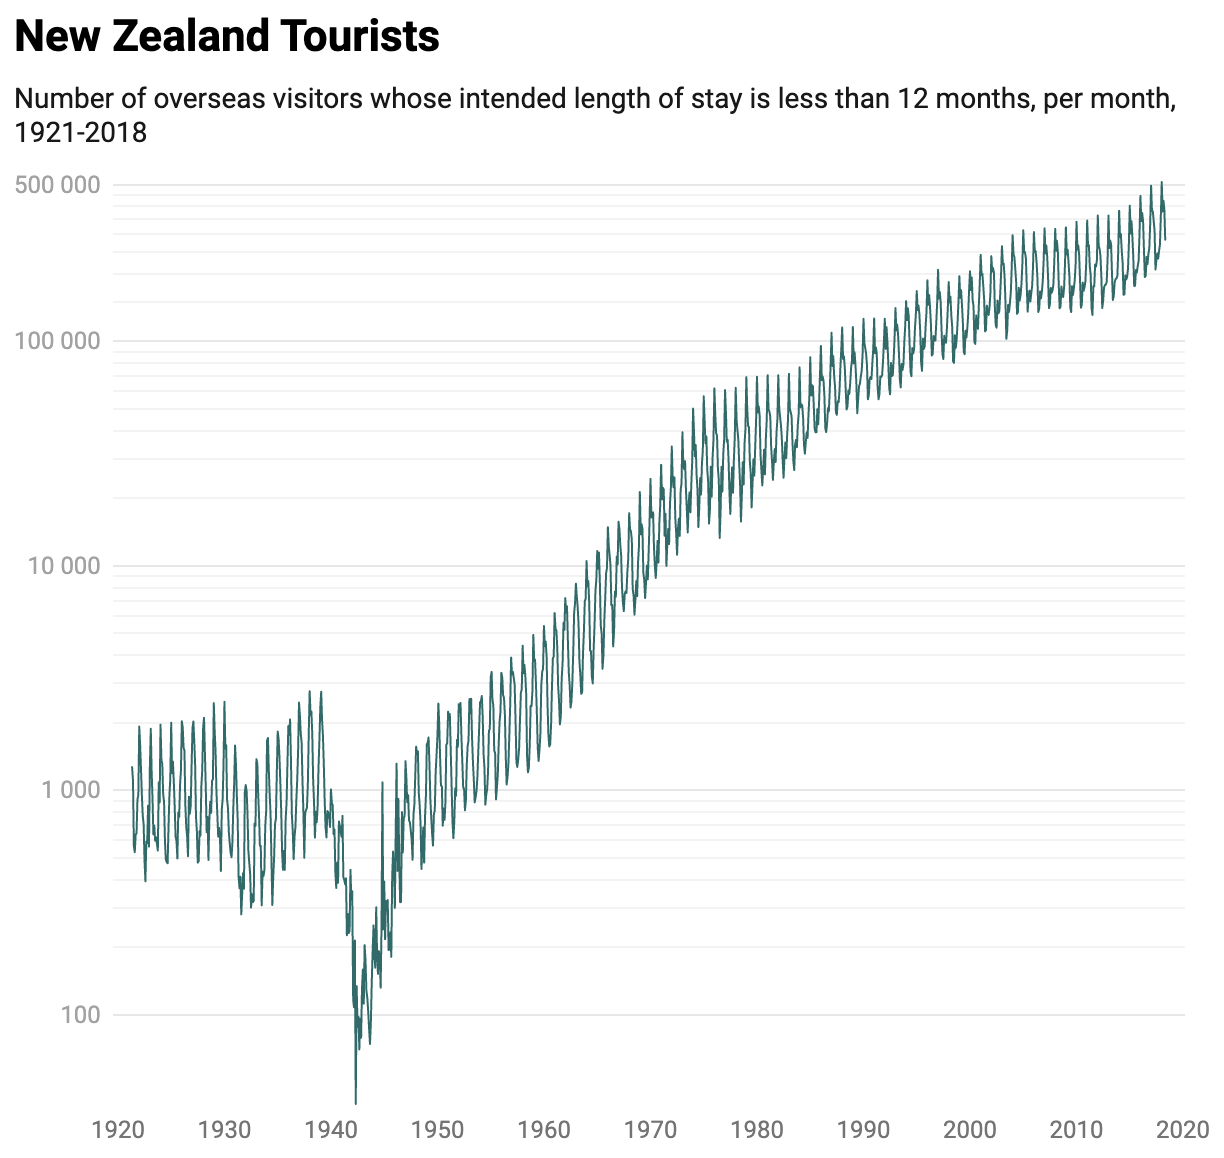 A line chart showing the number of overseas visitors in New Zealand. The chart has a logarithmic y scale with grid lines that become closer together for higher values